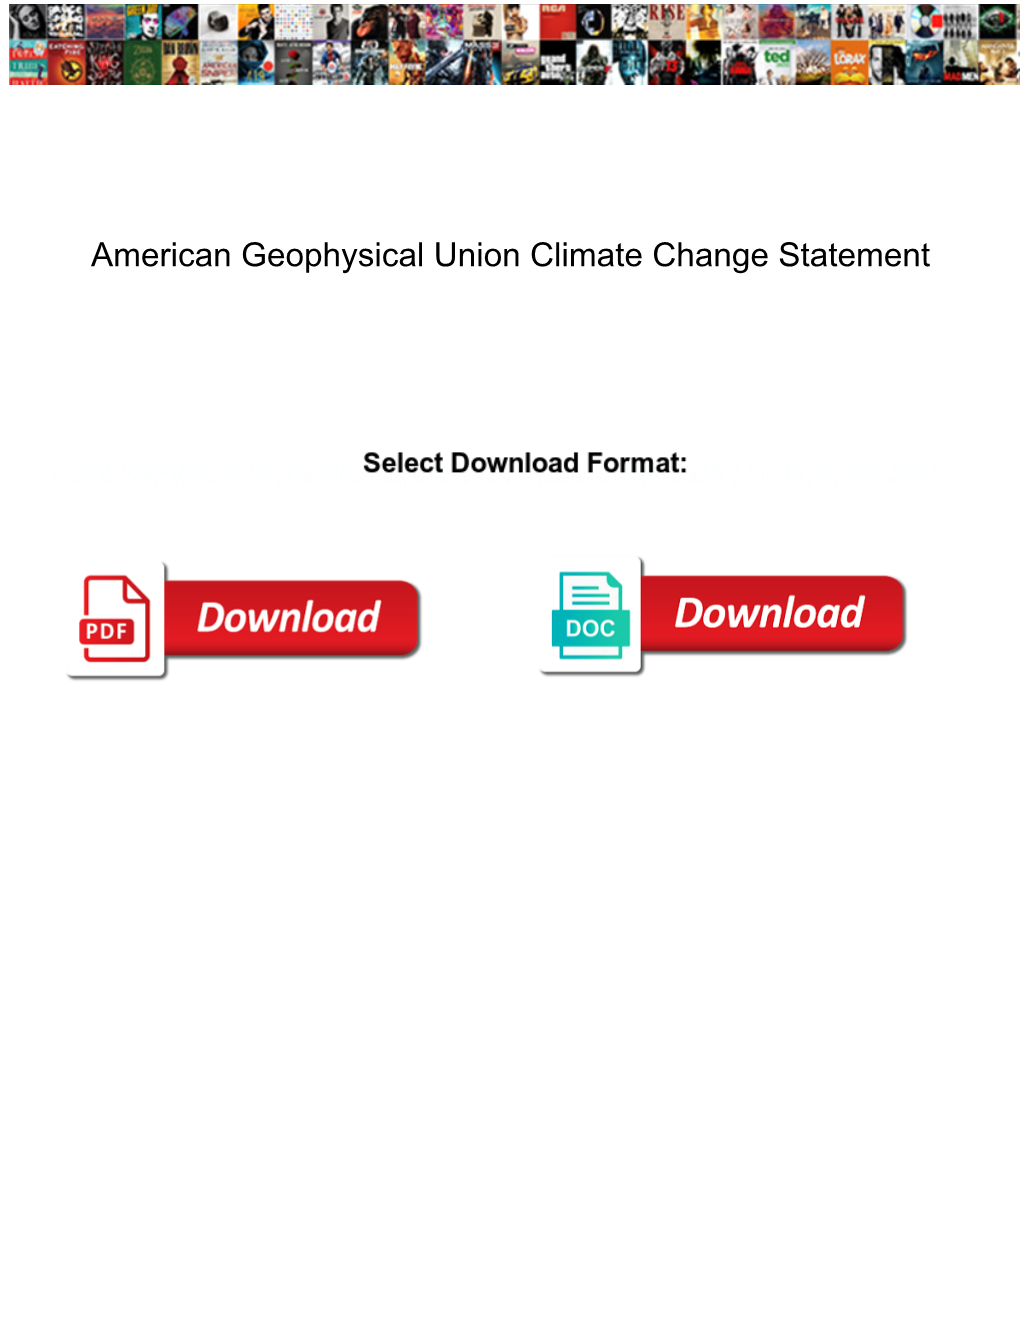 American Geophysical Union Climate Change Statement